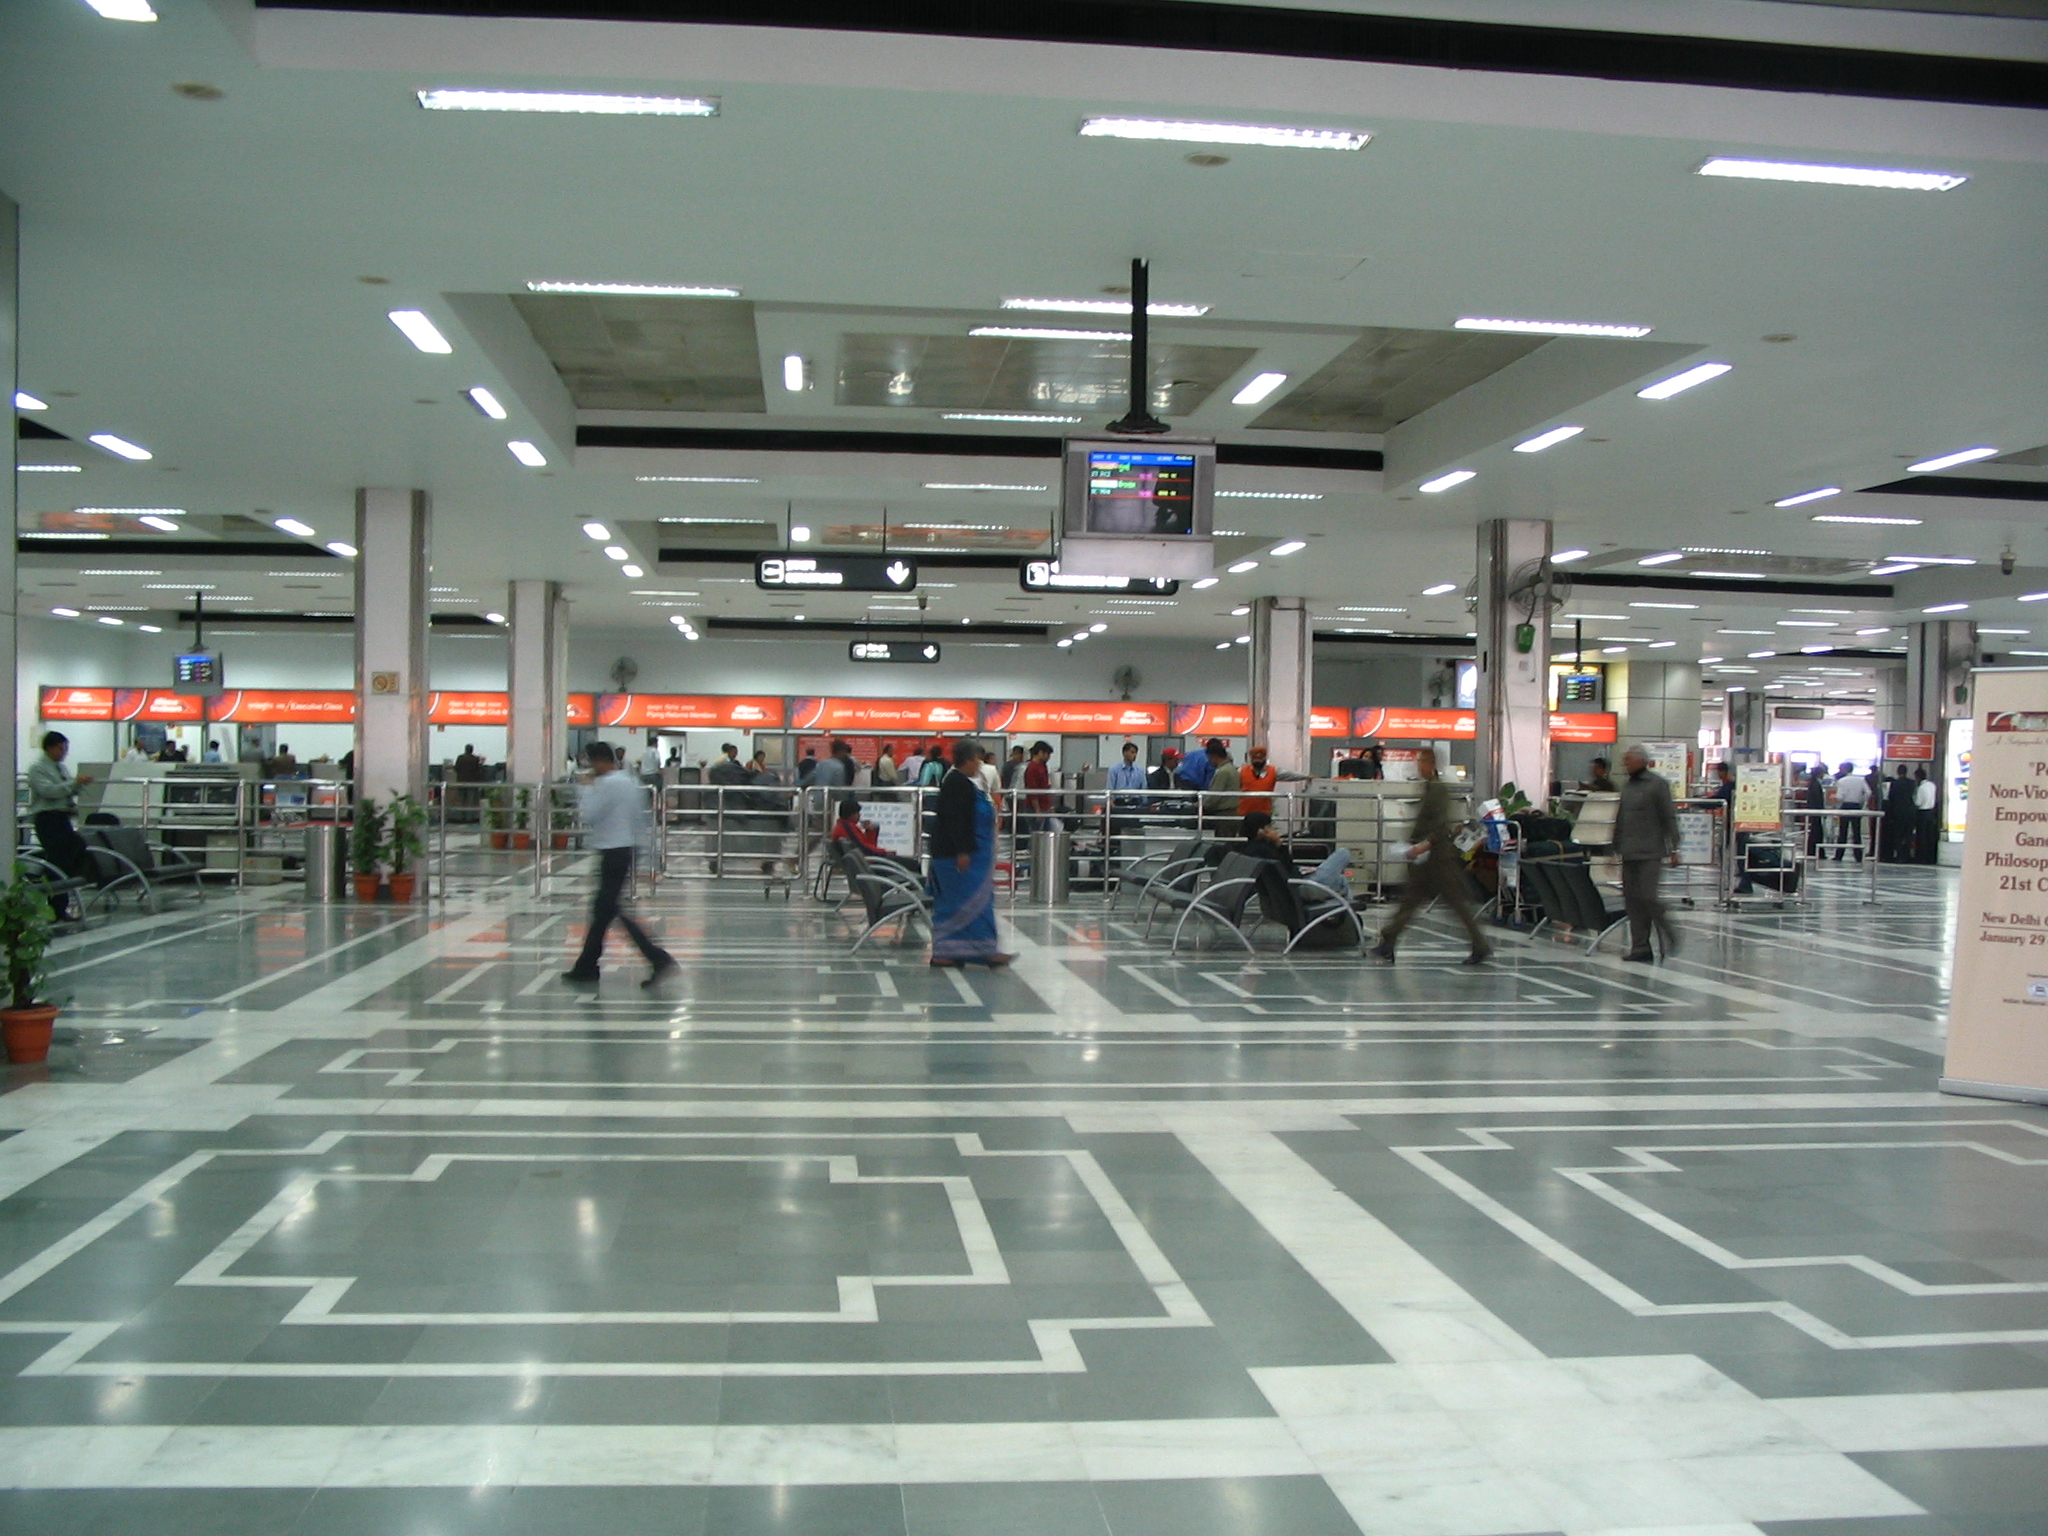 delhi airport wallpapers,building,airport,infrastructure,airport terminal,parking lot